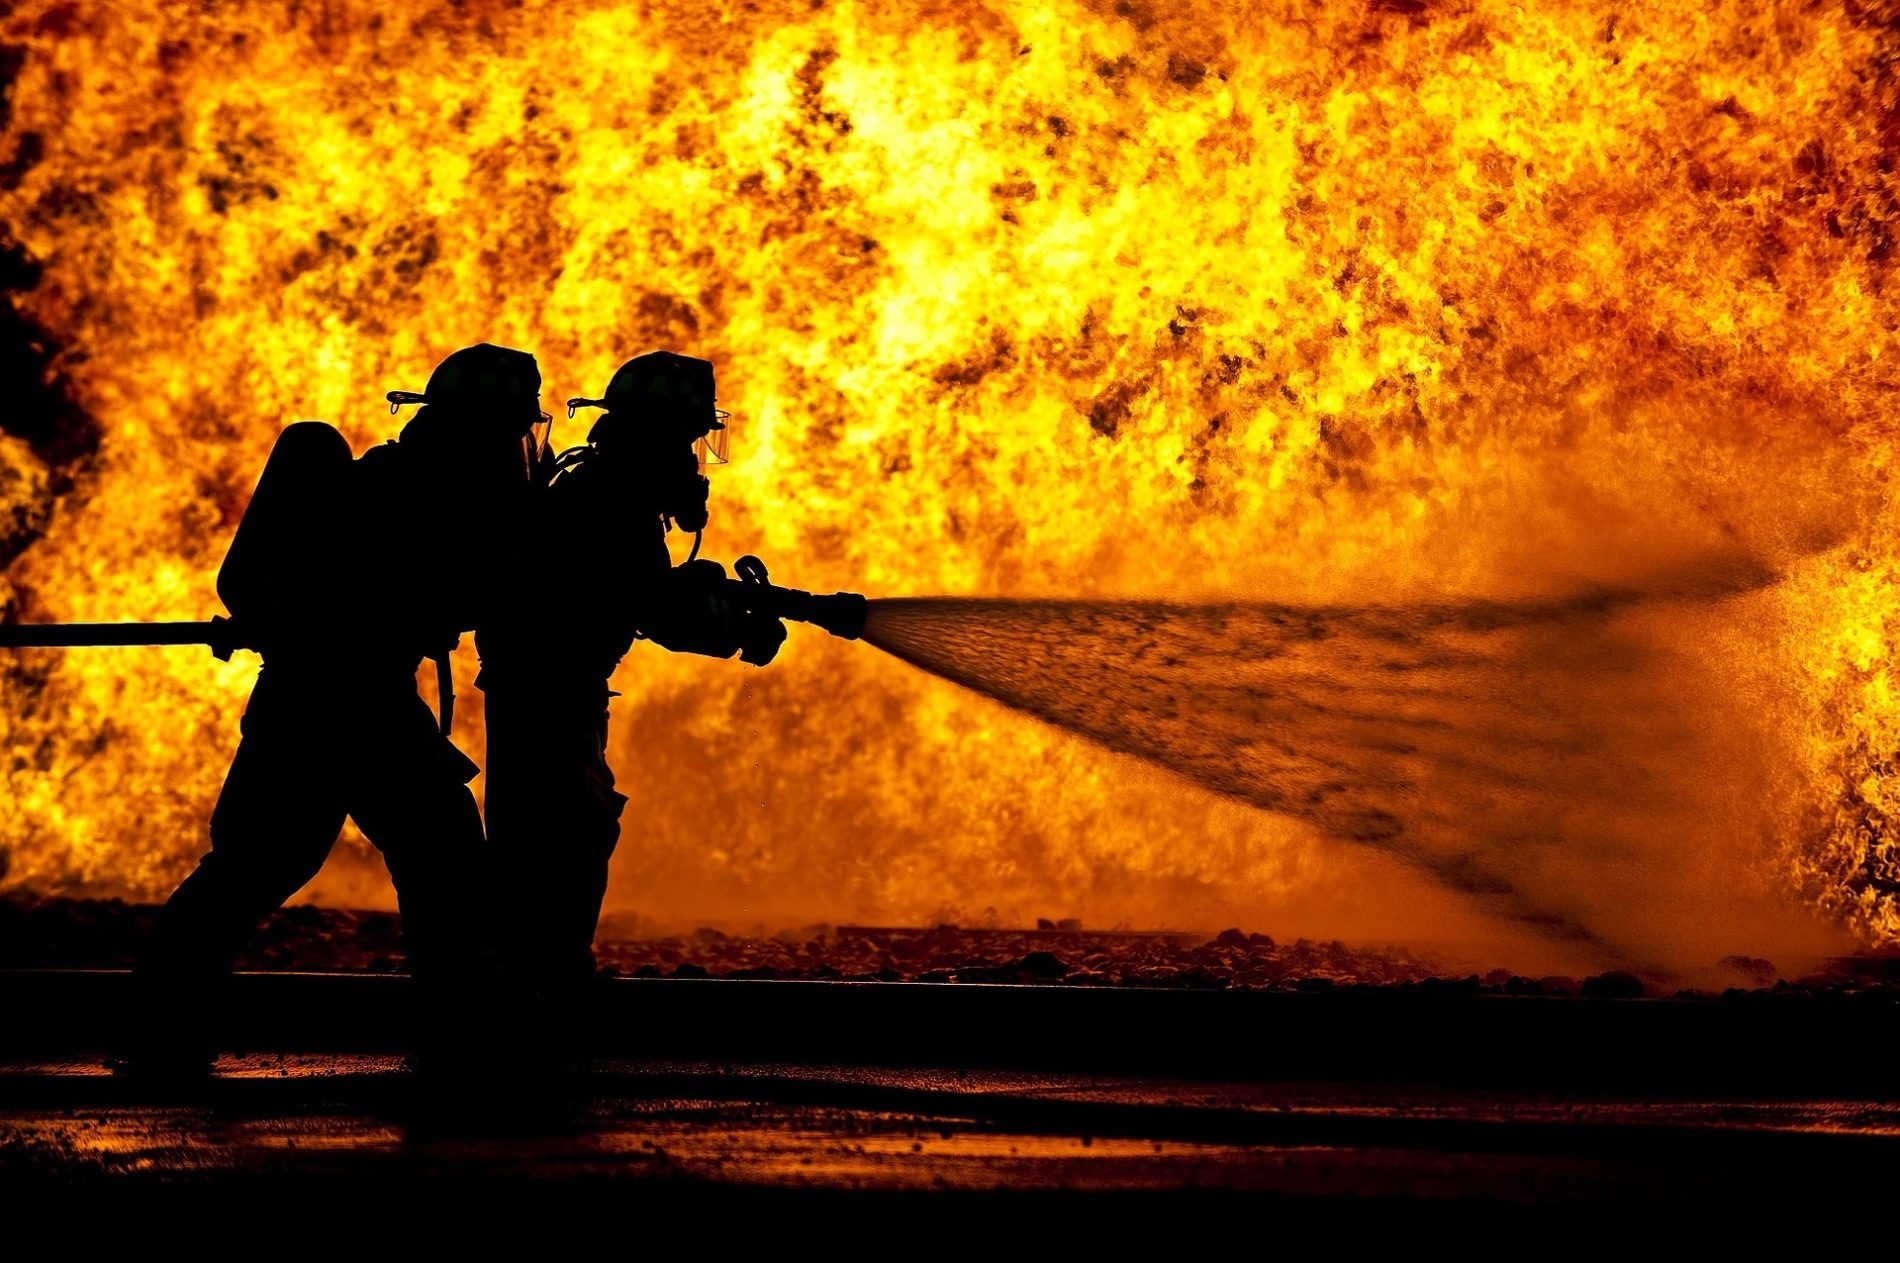 two fire fighters tackling a raging fire in the background